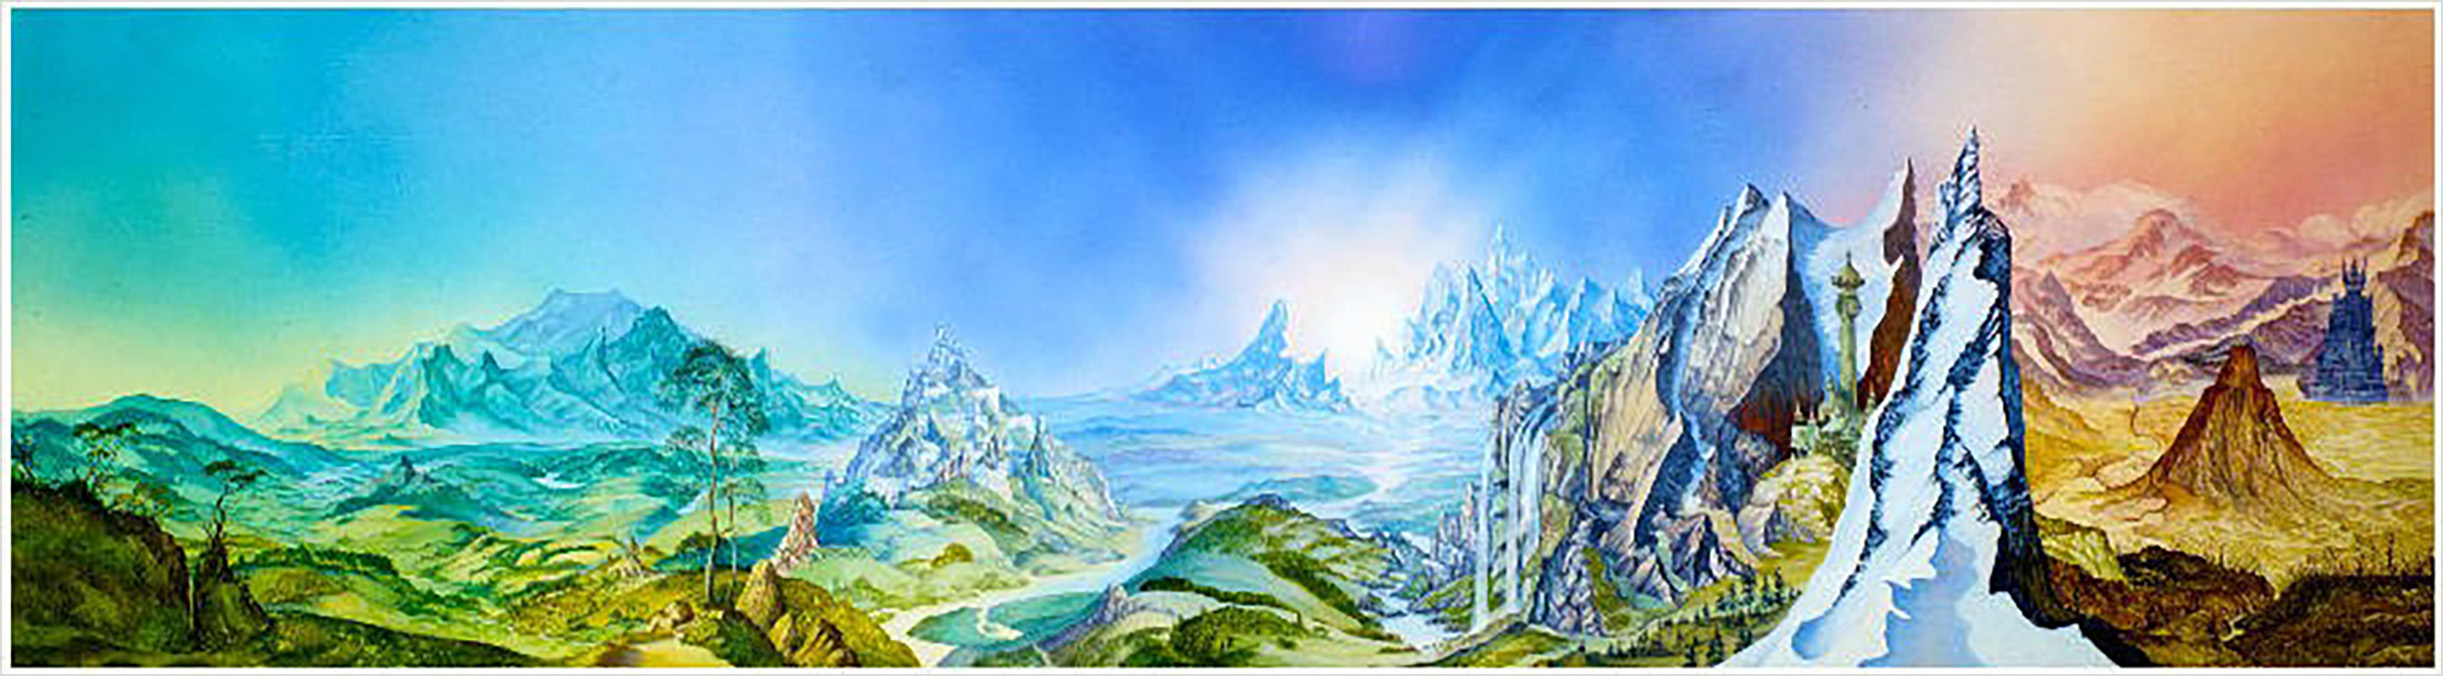 <titletext>

<strong>41. Tolkien Landscape</strong>

</titletext>

<br/><br/>

1983 oil on panel, image size 300 x 1080 mm. Artwork was commissioned for the trilogy book cover, Unwin Hyman, 1986.

<br/><br/>

The original oil painting is on permanent exhibition at Lakeside Gallery.<span class="ngViews">11 views</span>